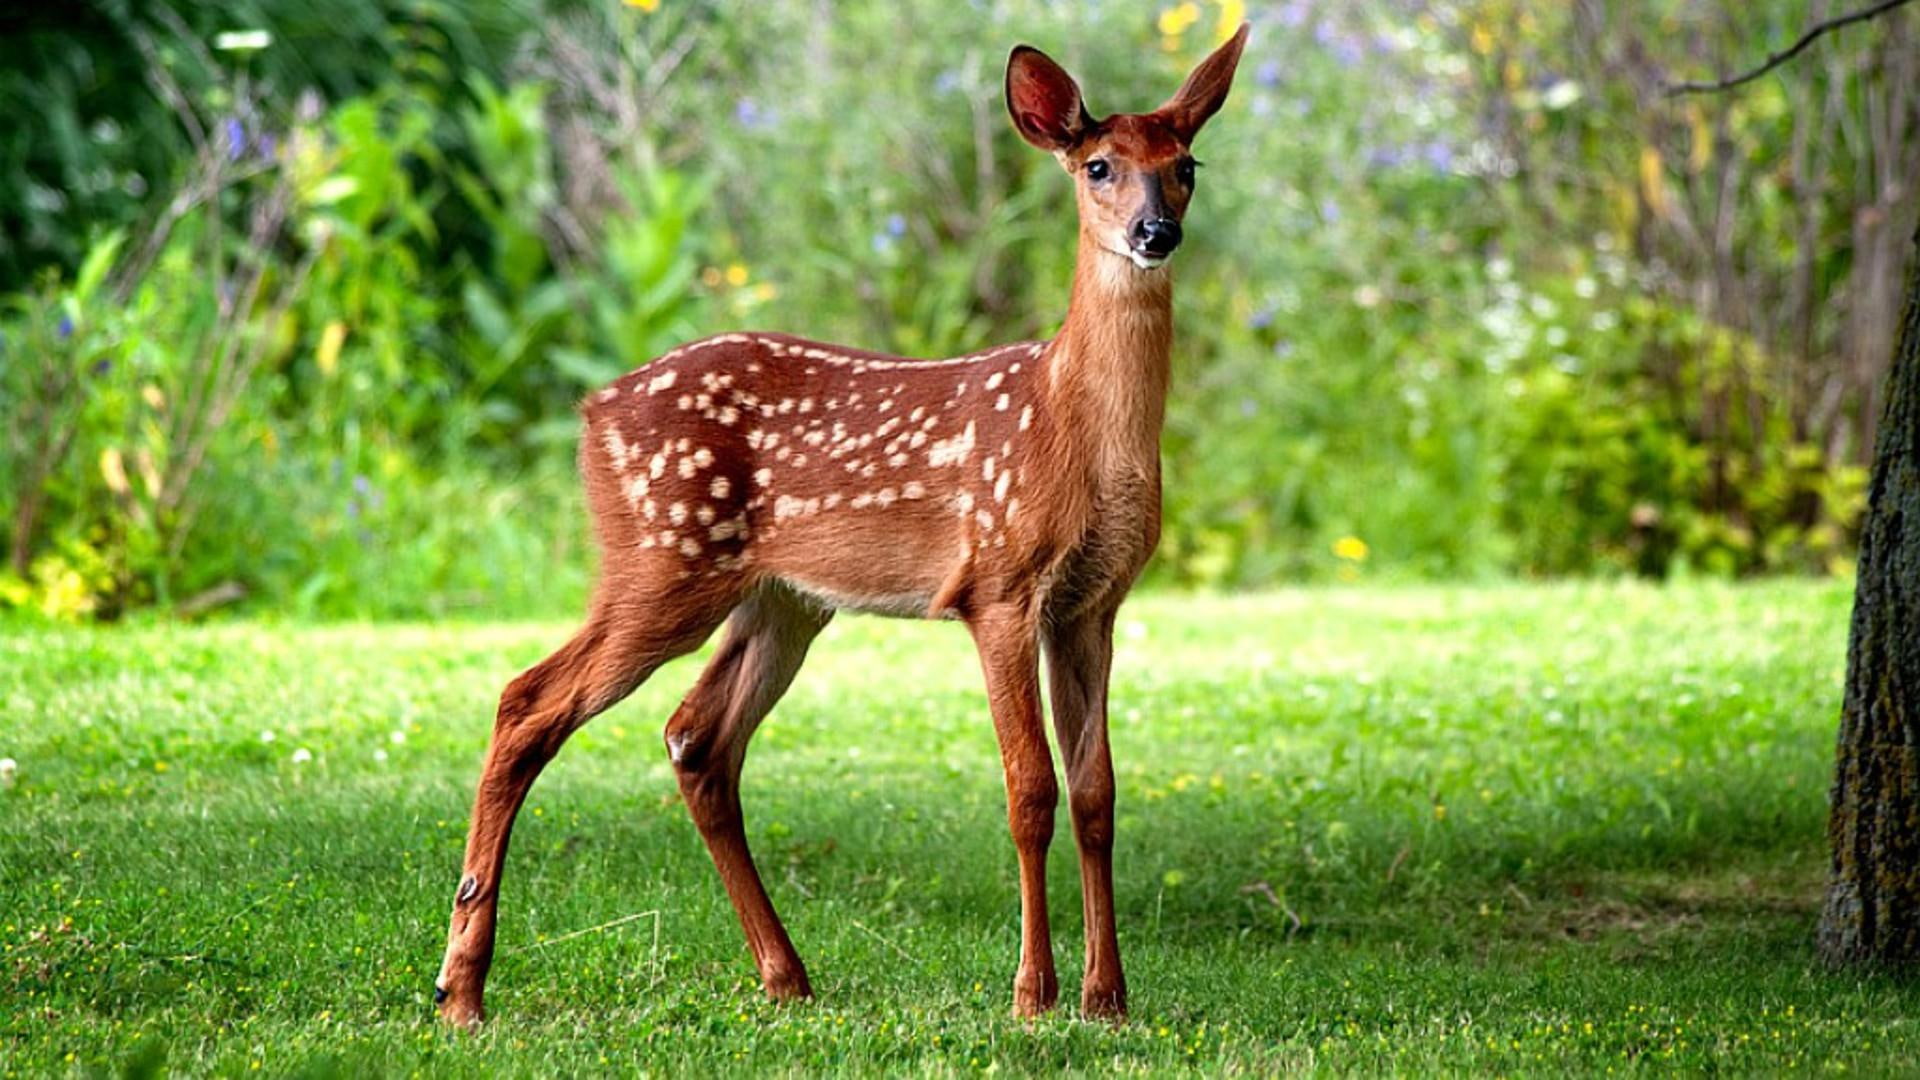 Wild Baby Fawn, white spotted deer, baby animals, buck, nature